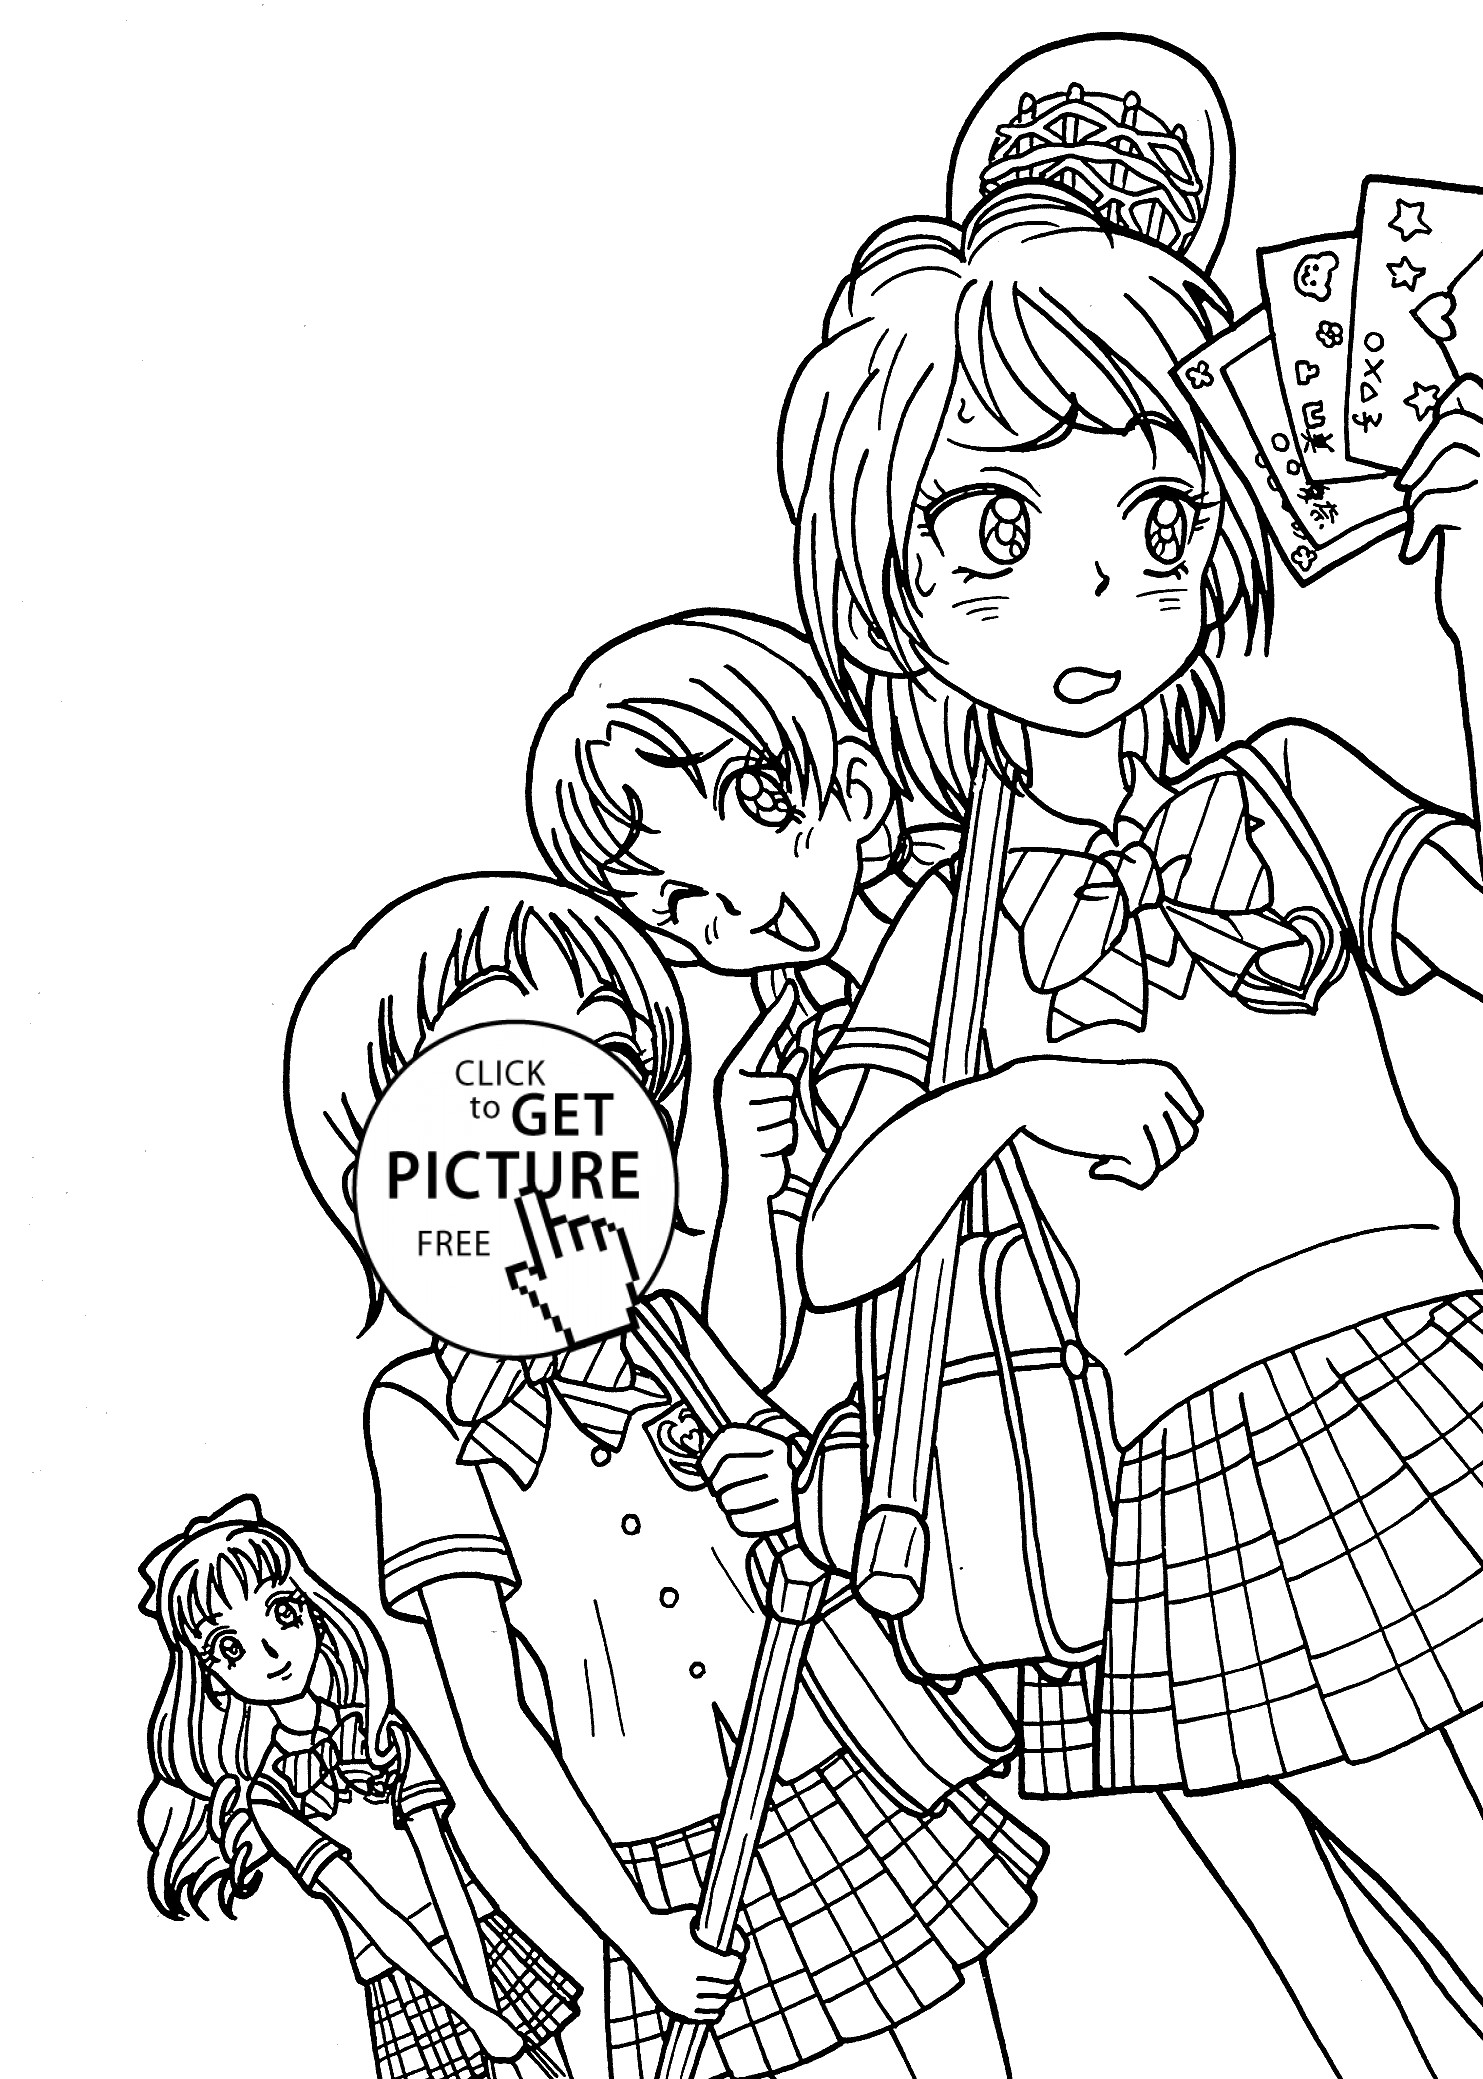 Manga Coloring Pages For Kids
 Girls from Pretty cure anime coloring pages for kids